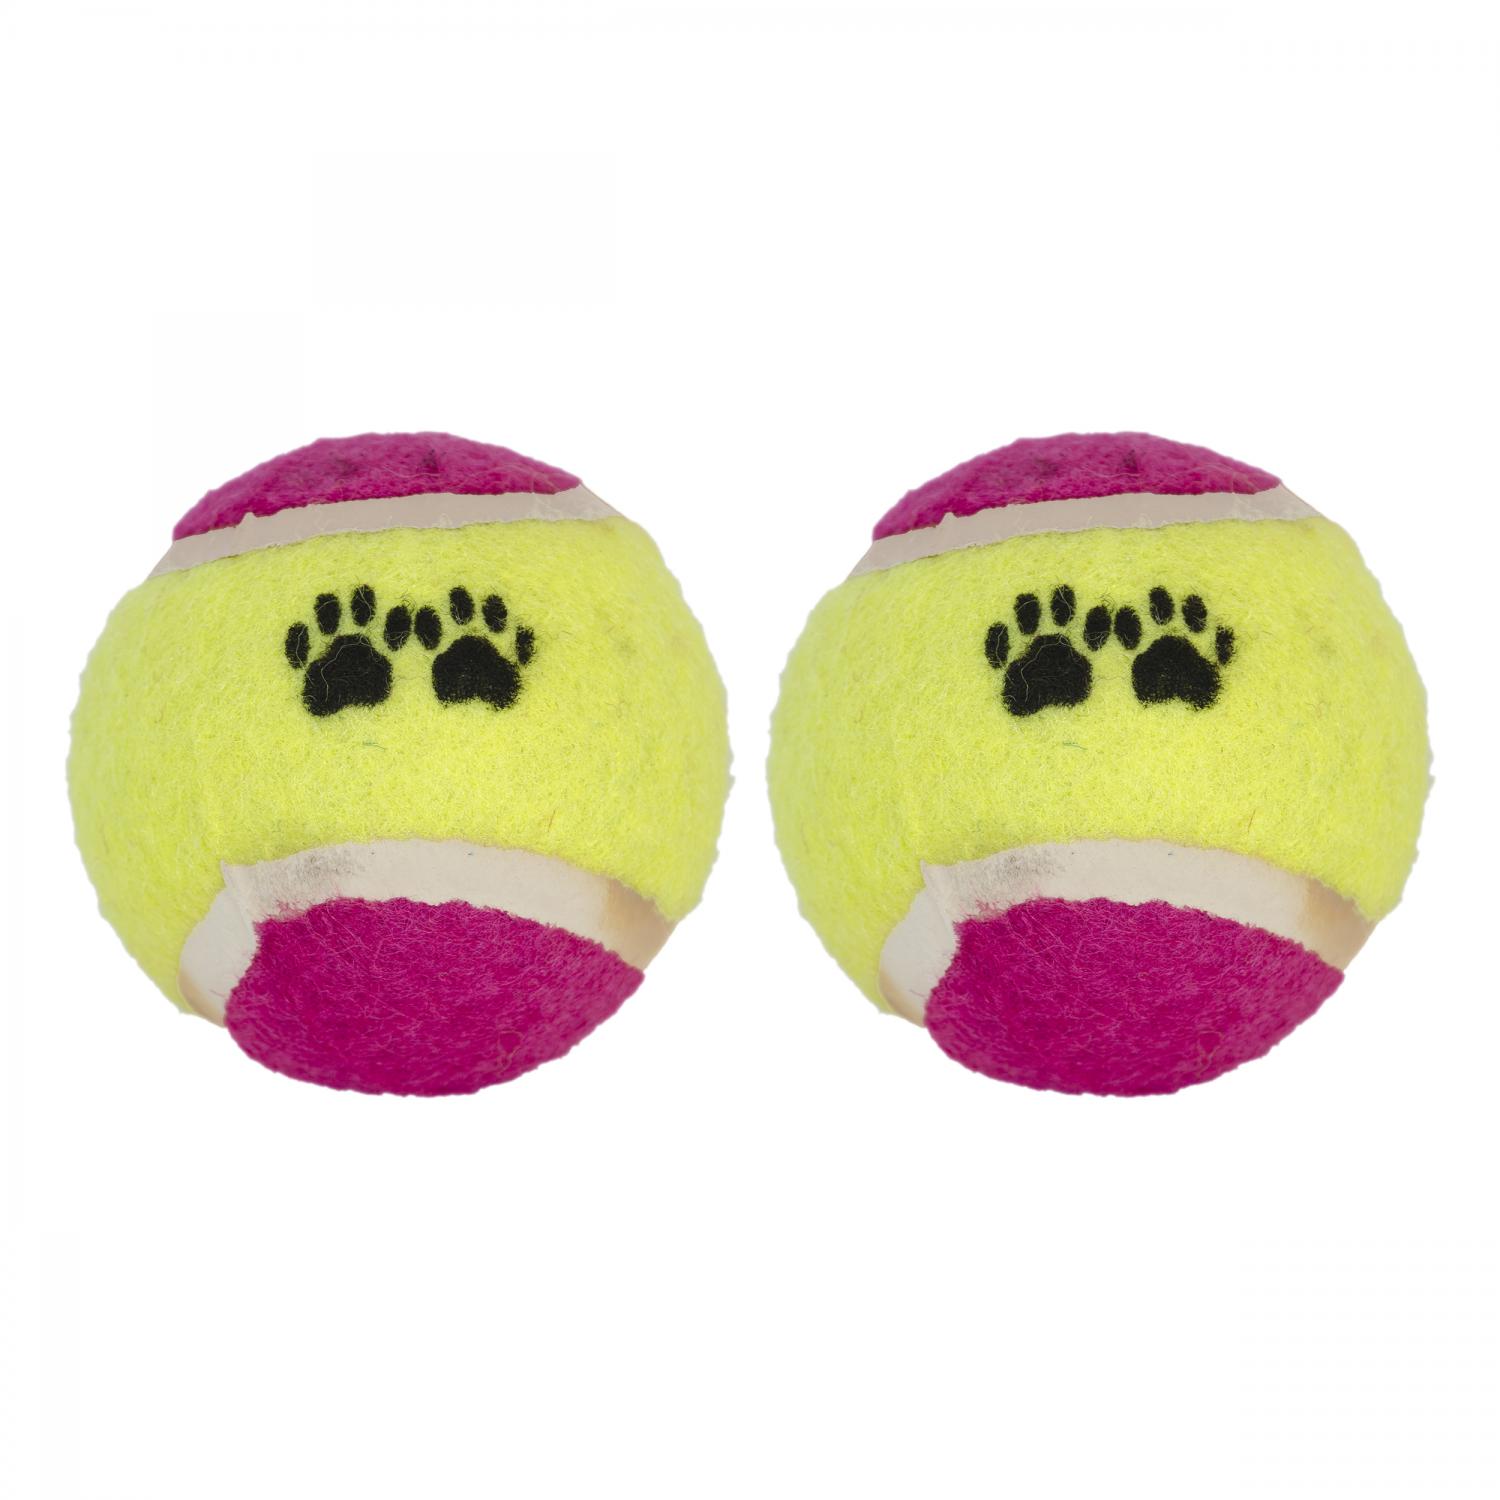 Dogman Boll Wille 2-pack